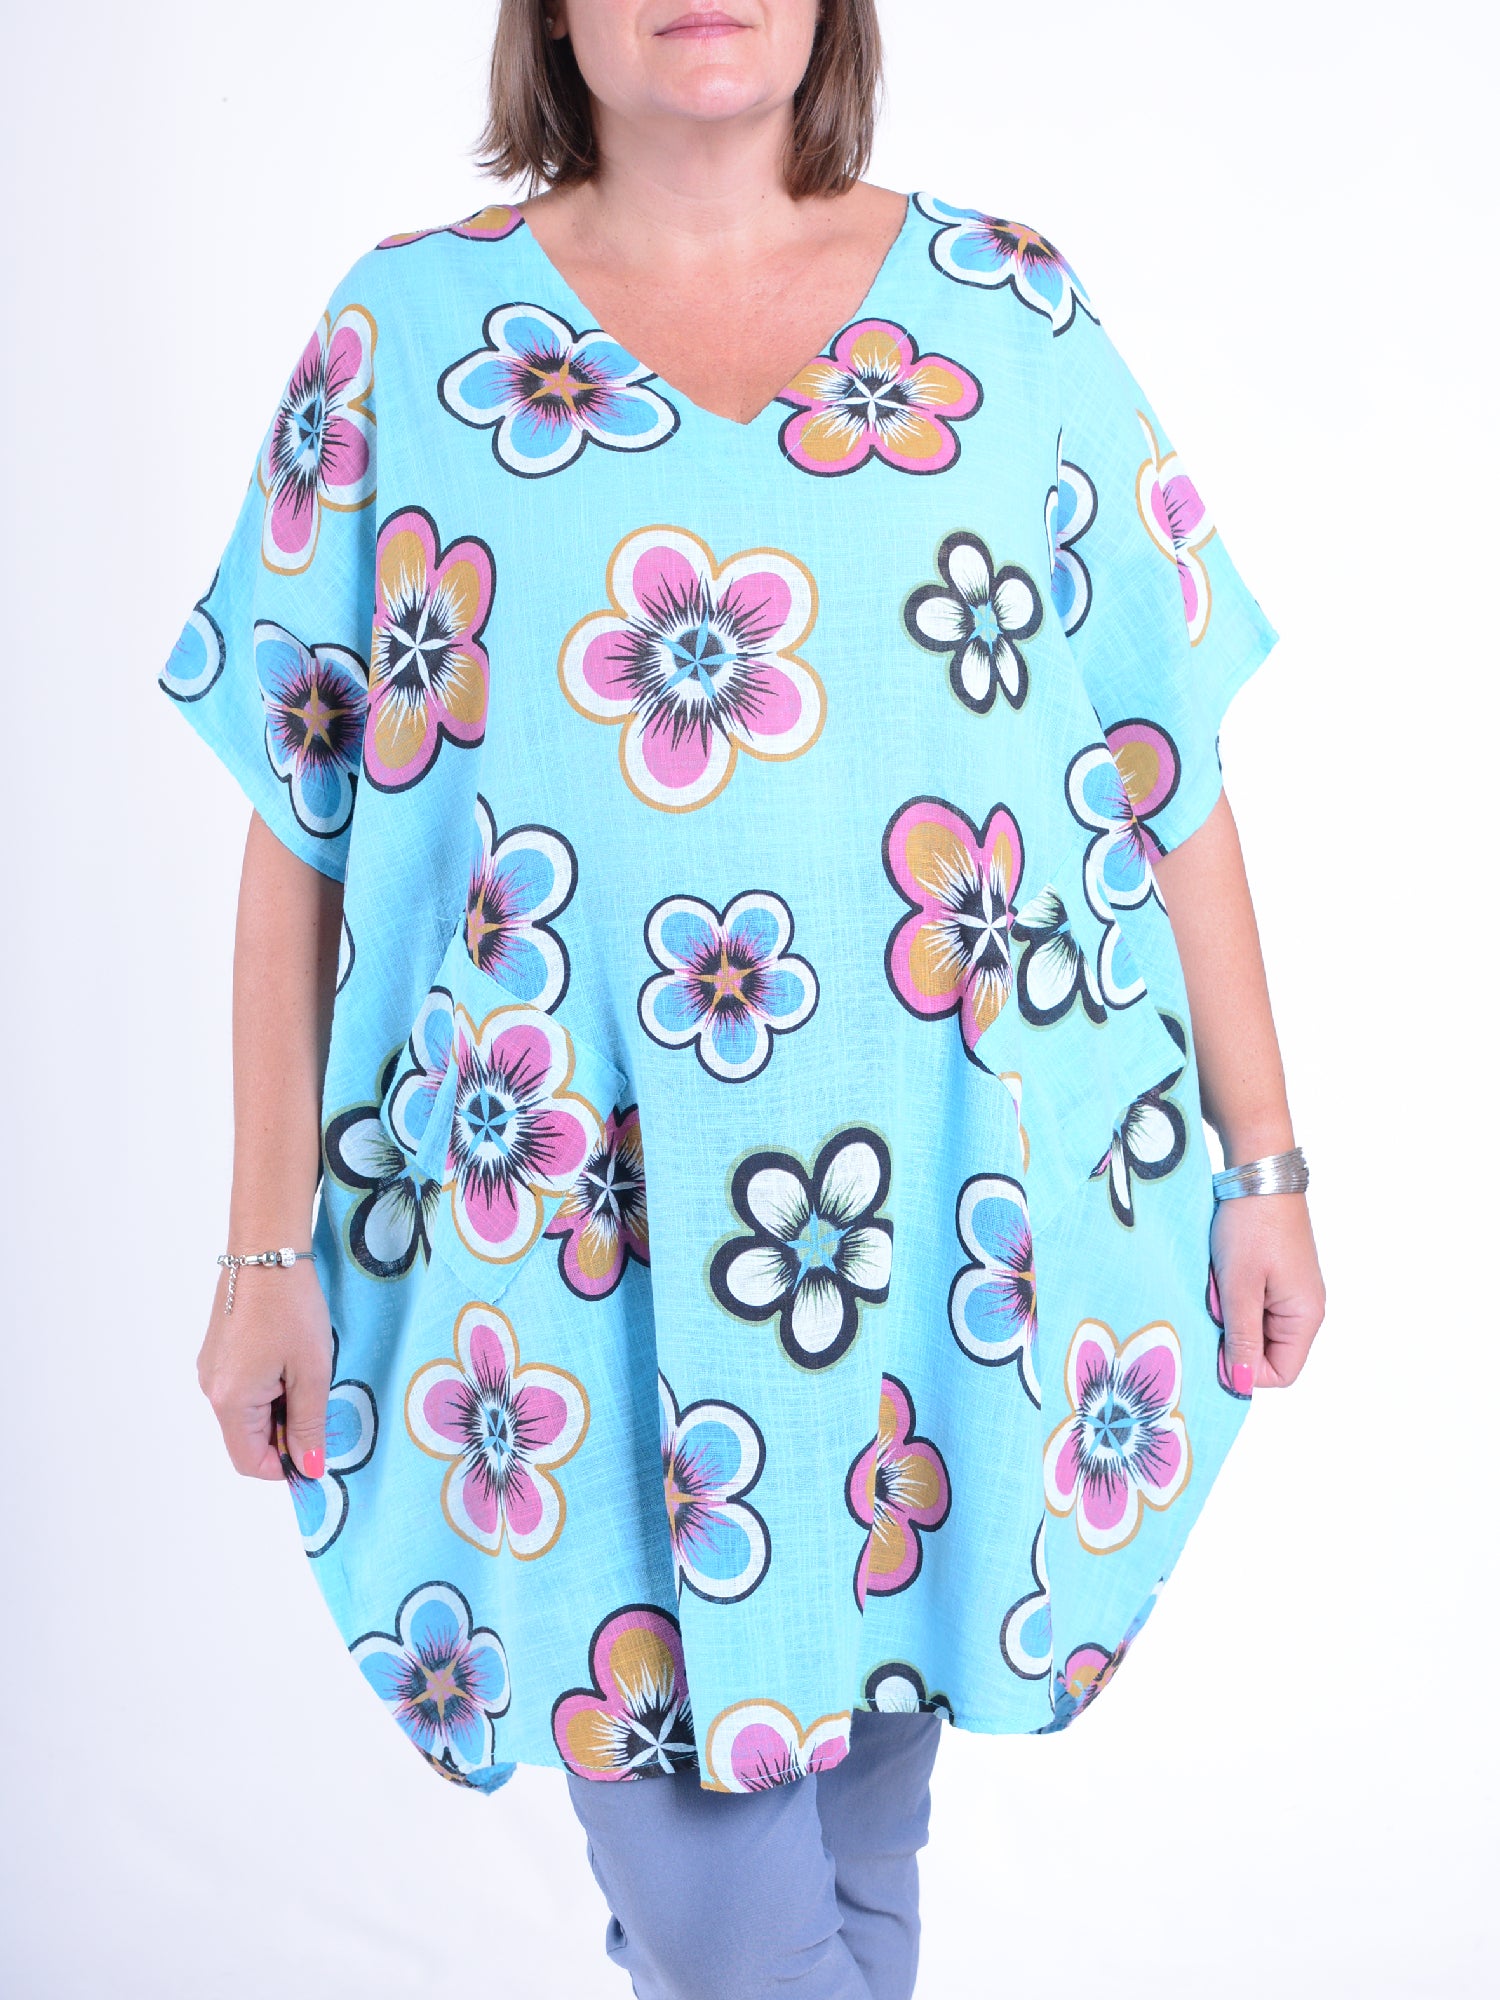 Lightweight Cotton Flower Print Tunic - 10162, , Pure Plus Clothing, Lagenlook Clothing, Plus Size Fashion, Over 50 Fashion